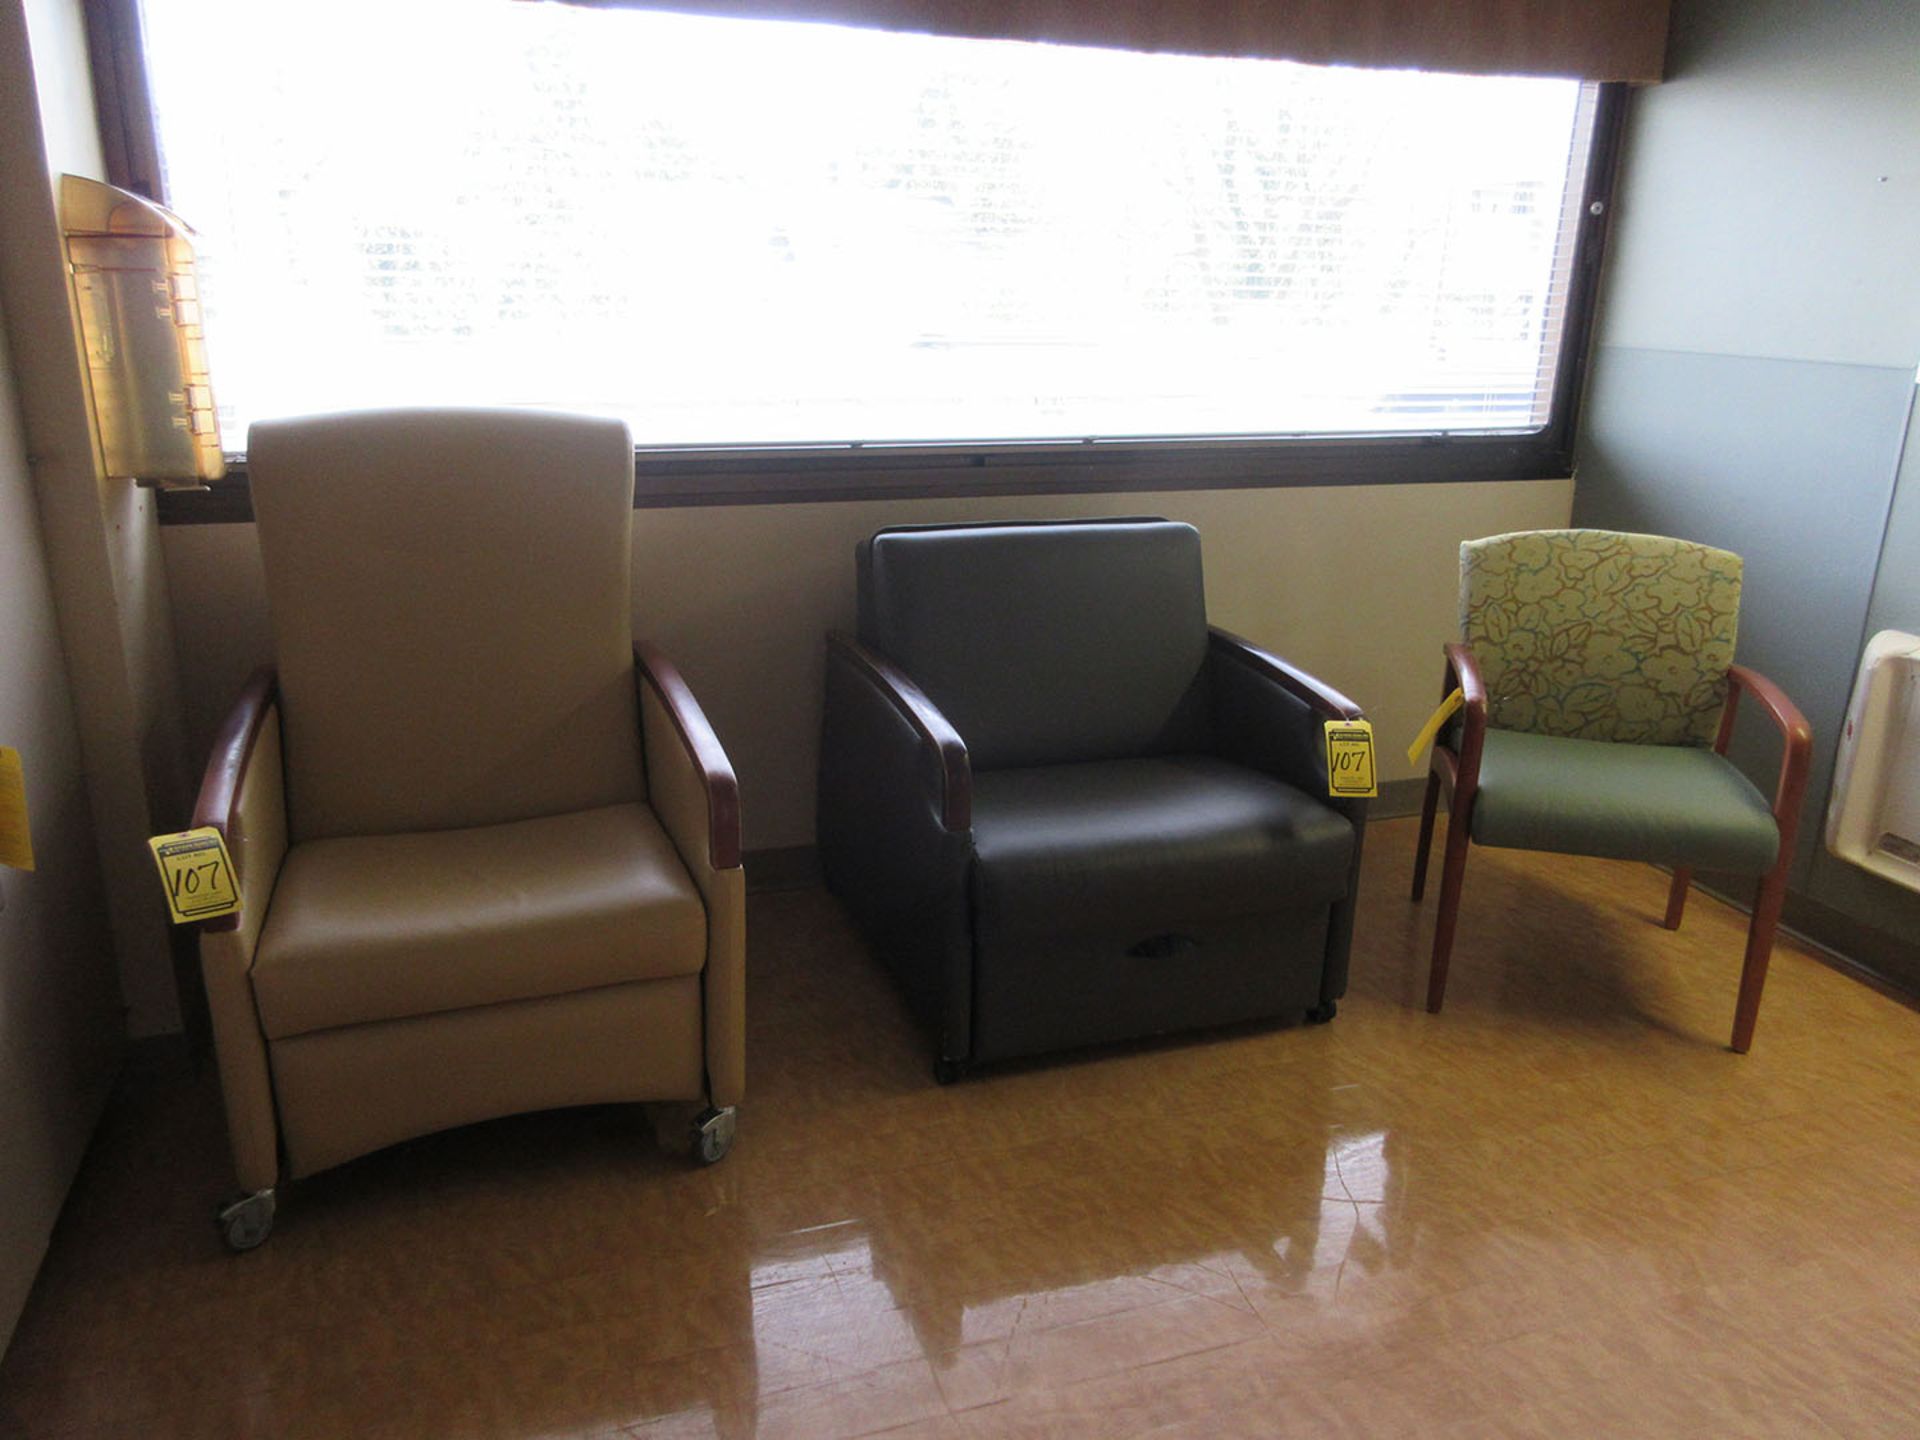 PATIENT CHAIR, LOBBY CHAIR, AND CONVERTIBLE CHAIR/BED